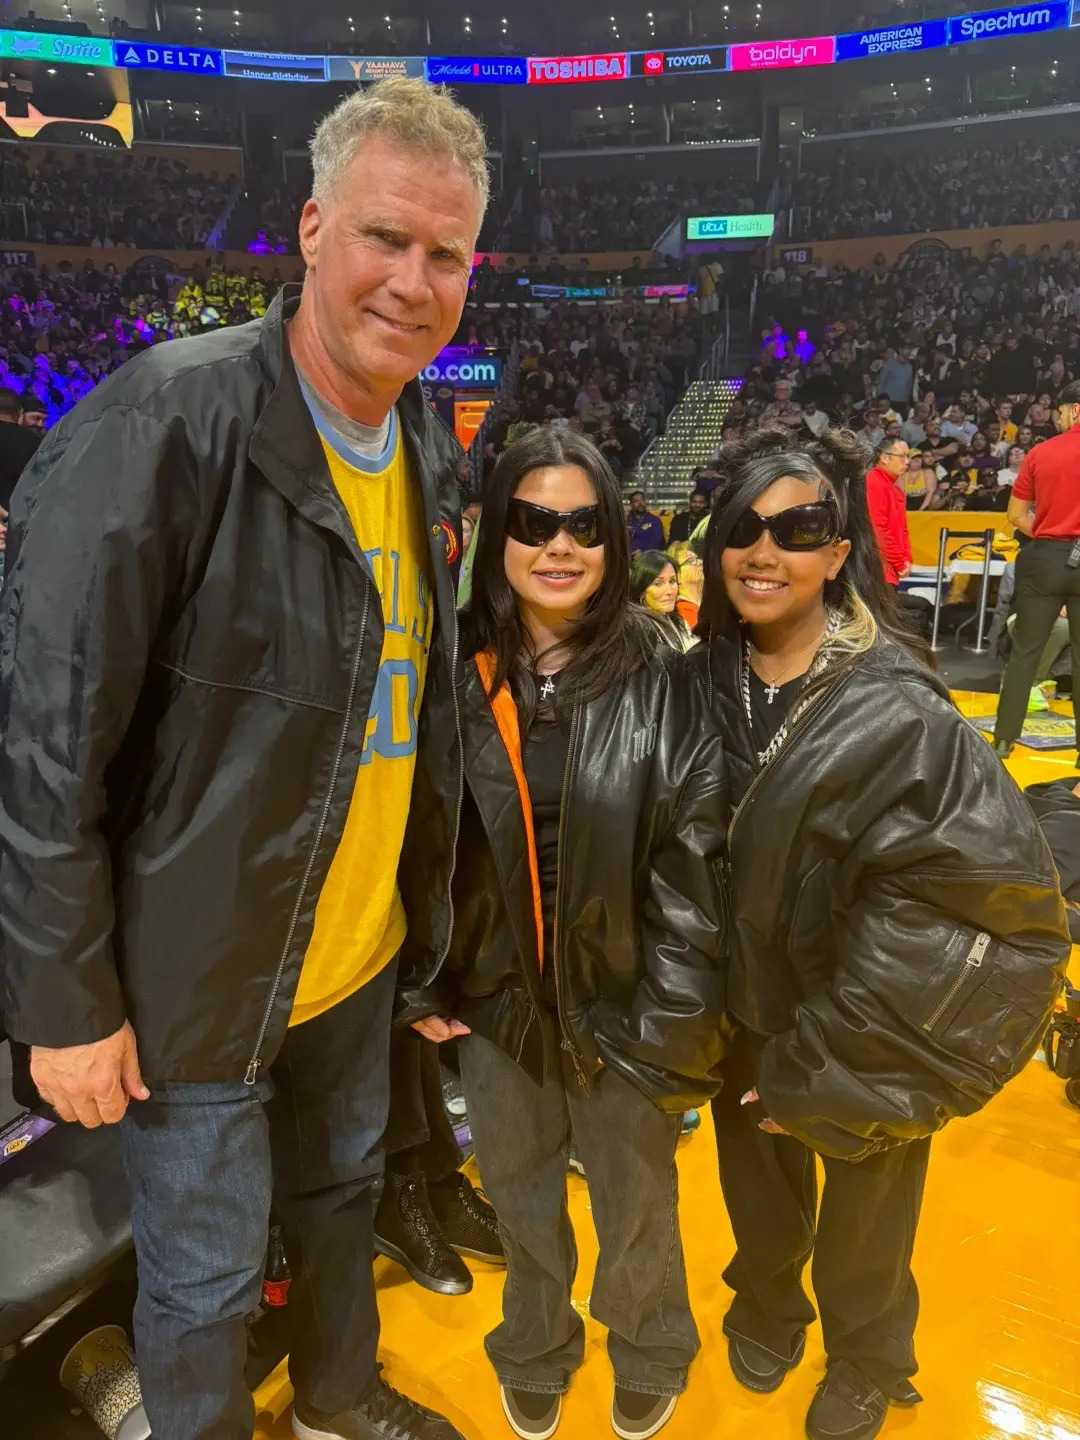 North and her friend were also shown standing on the court with actor Will Ferrell